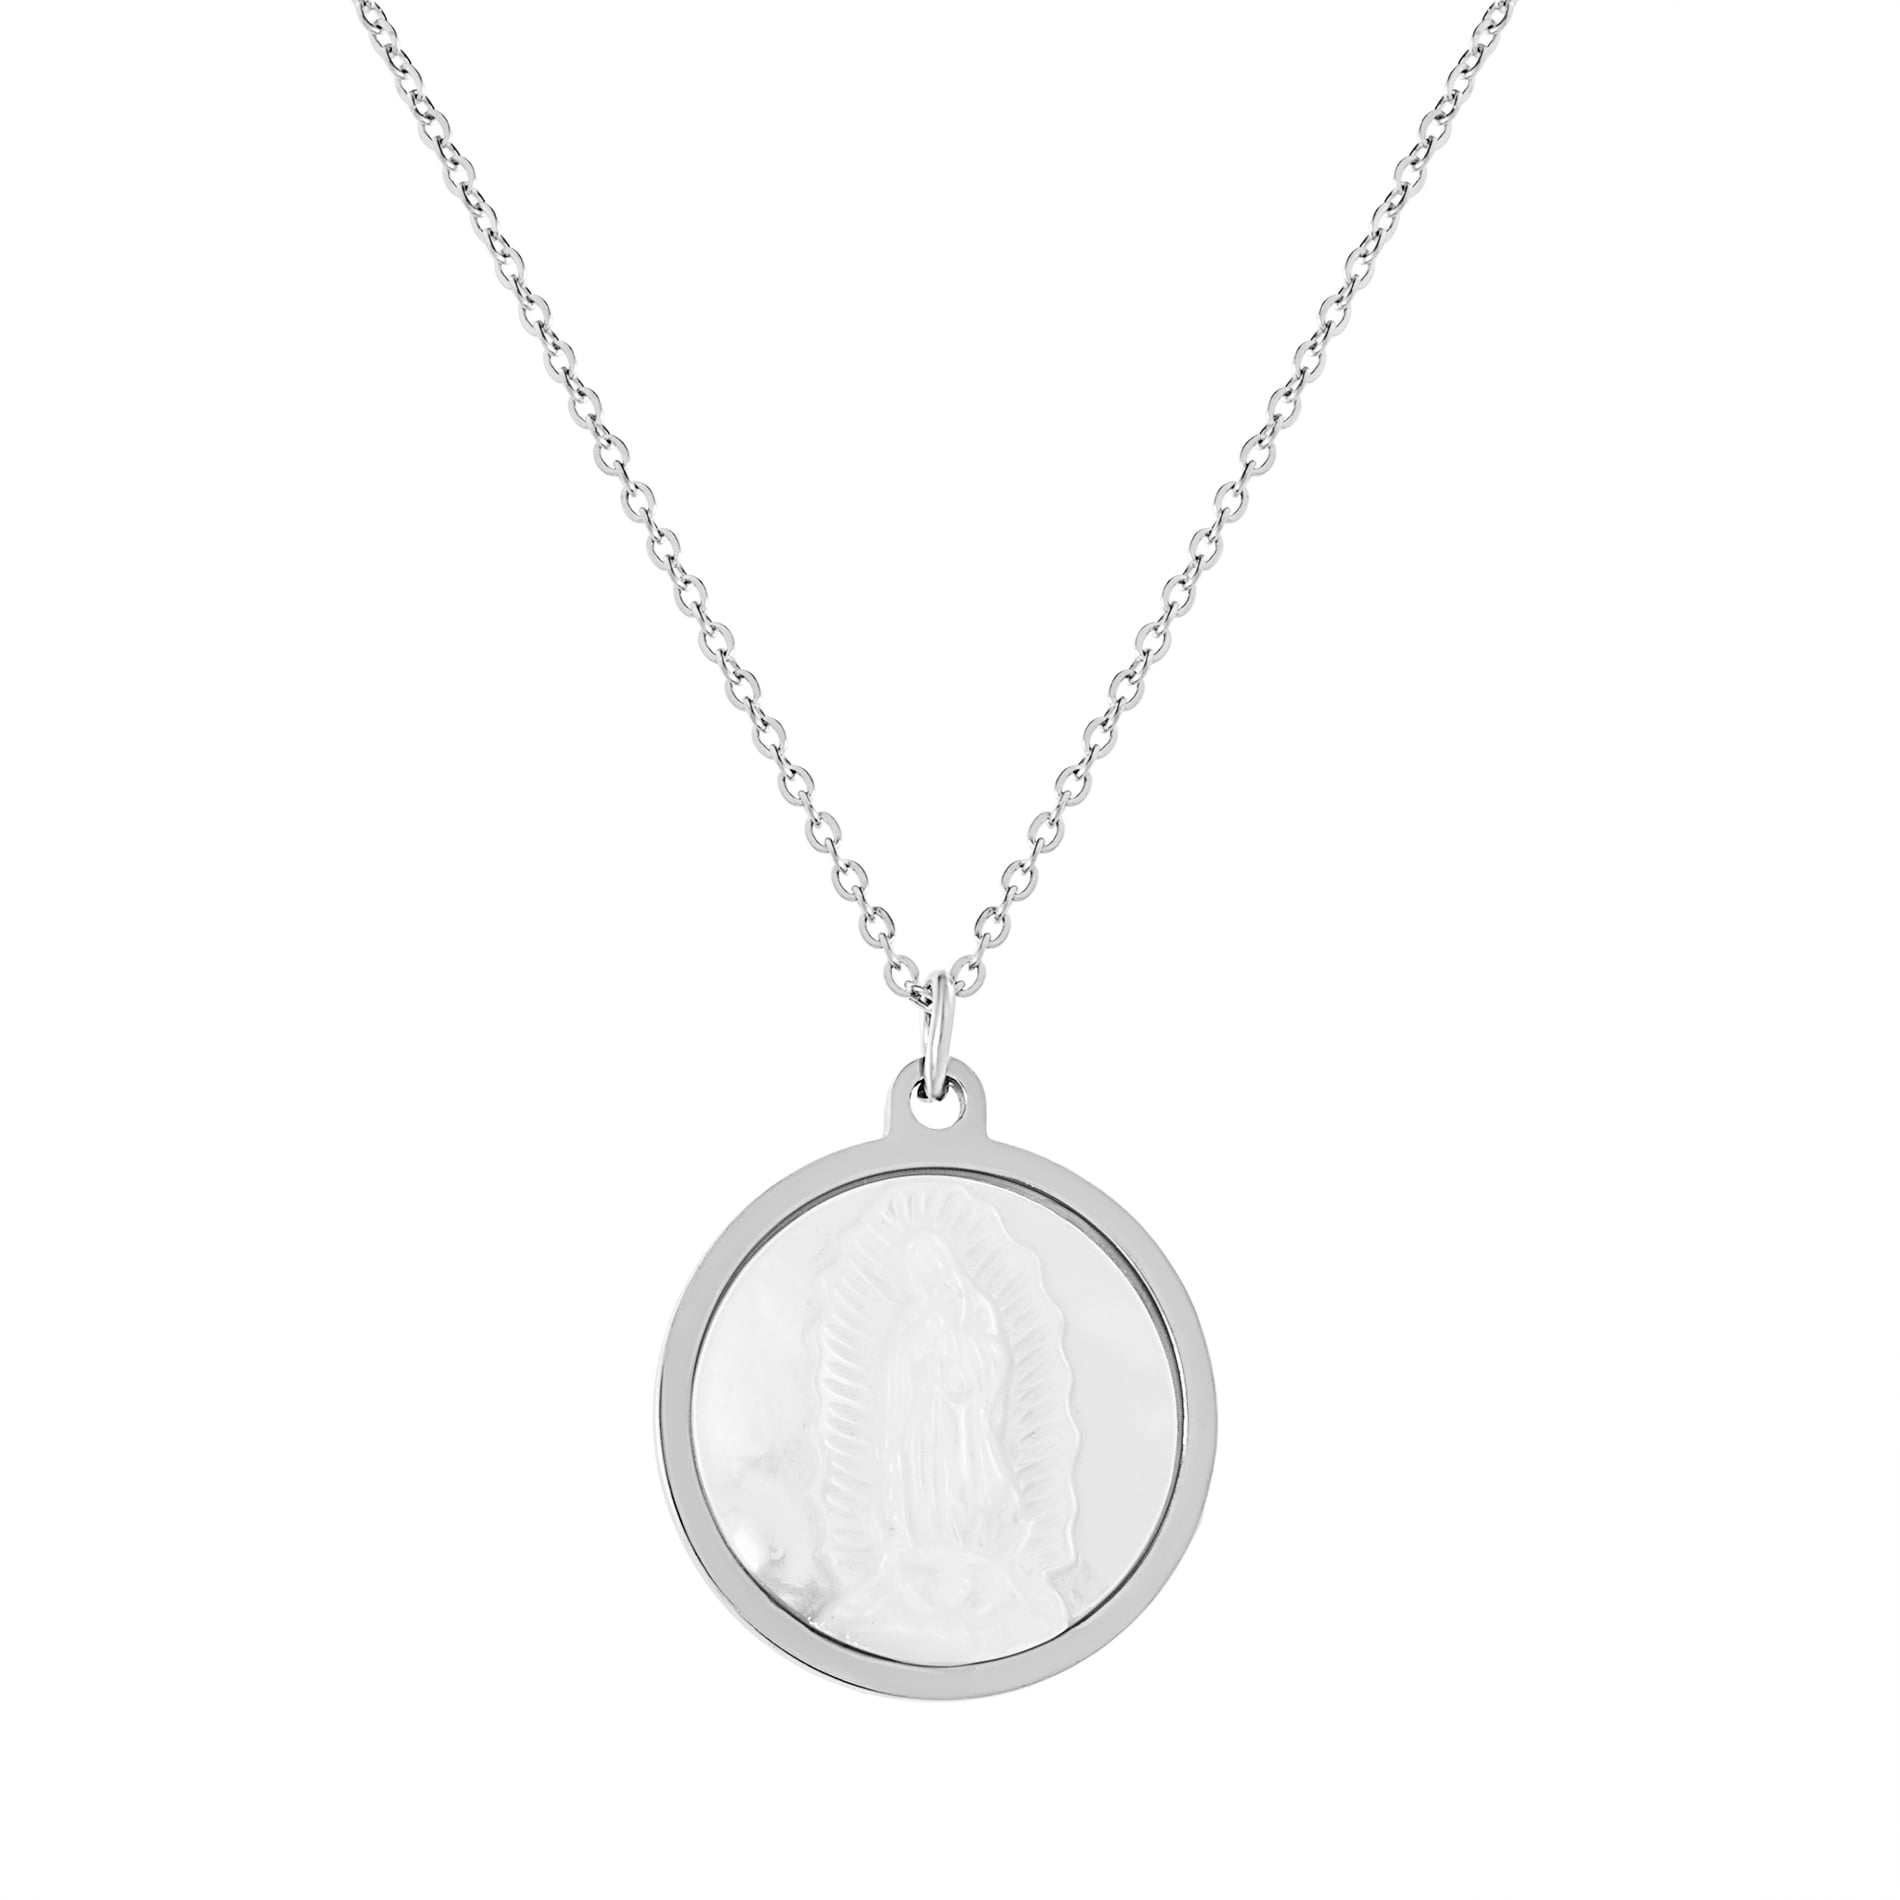 mother of pearl virgin mary necklace